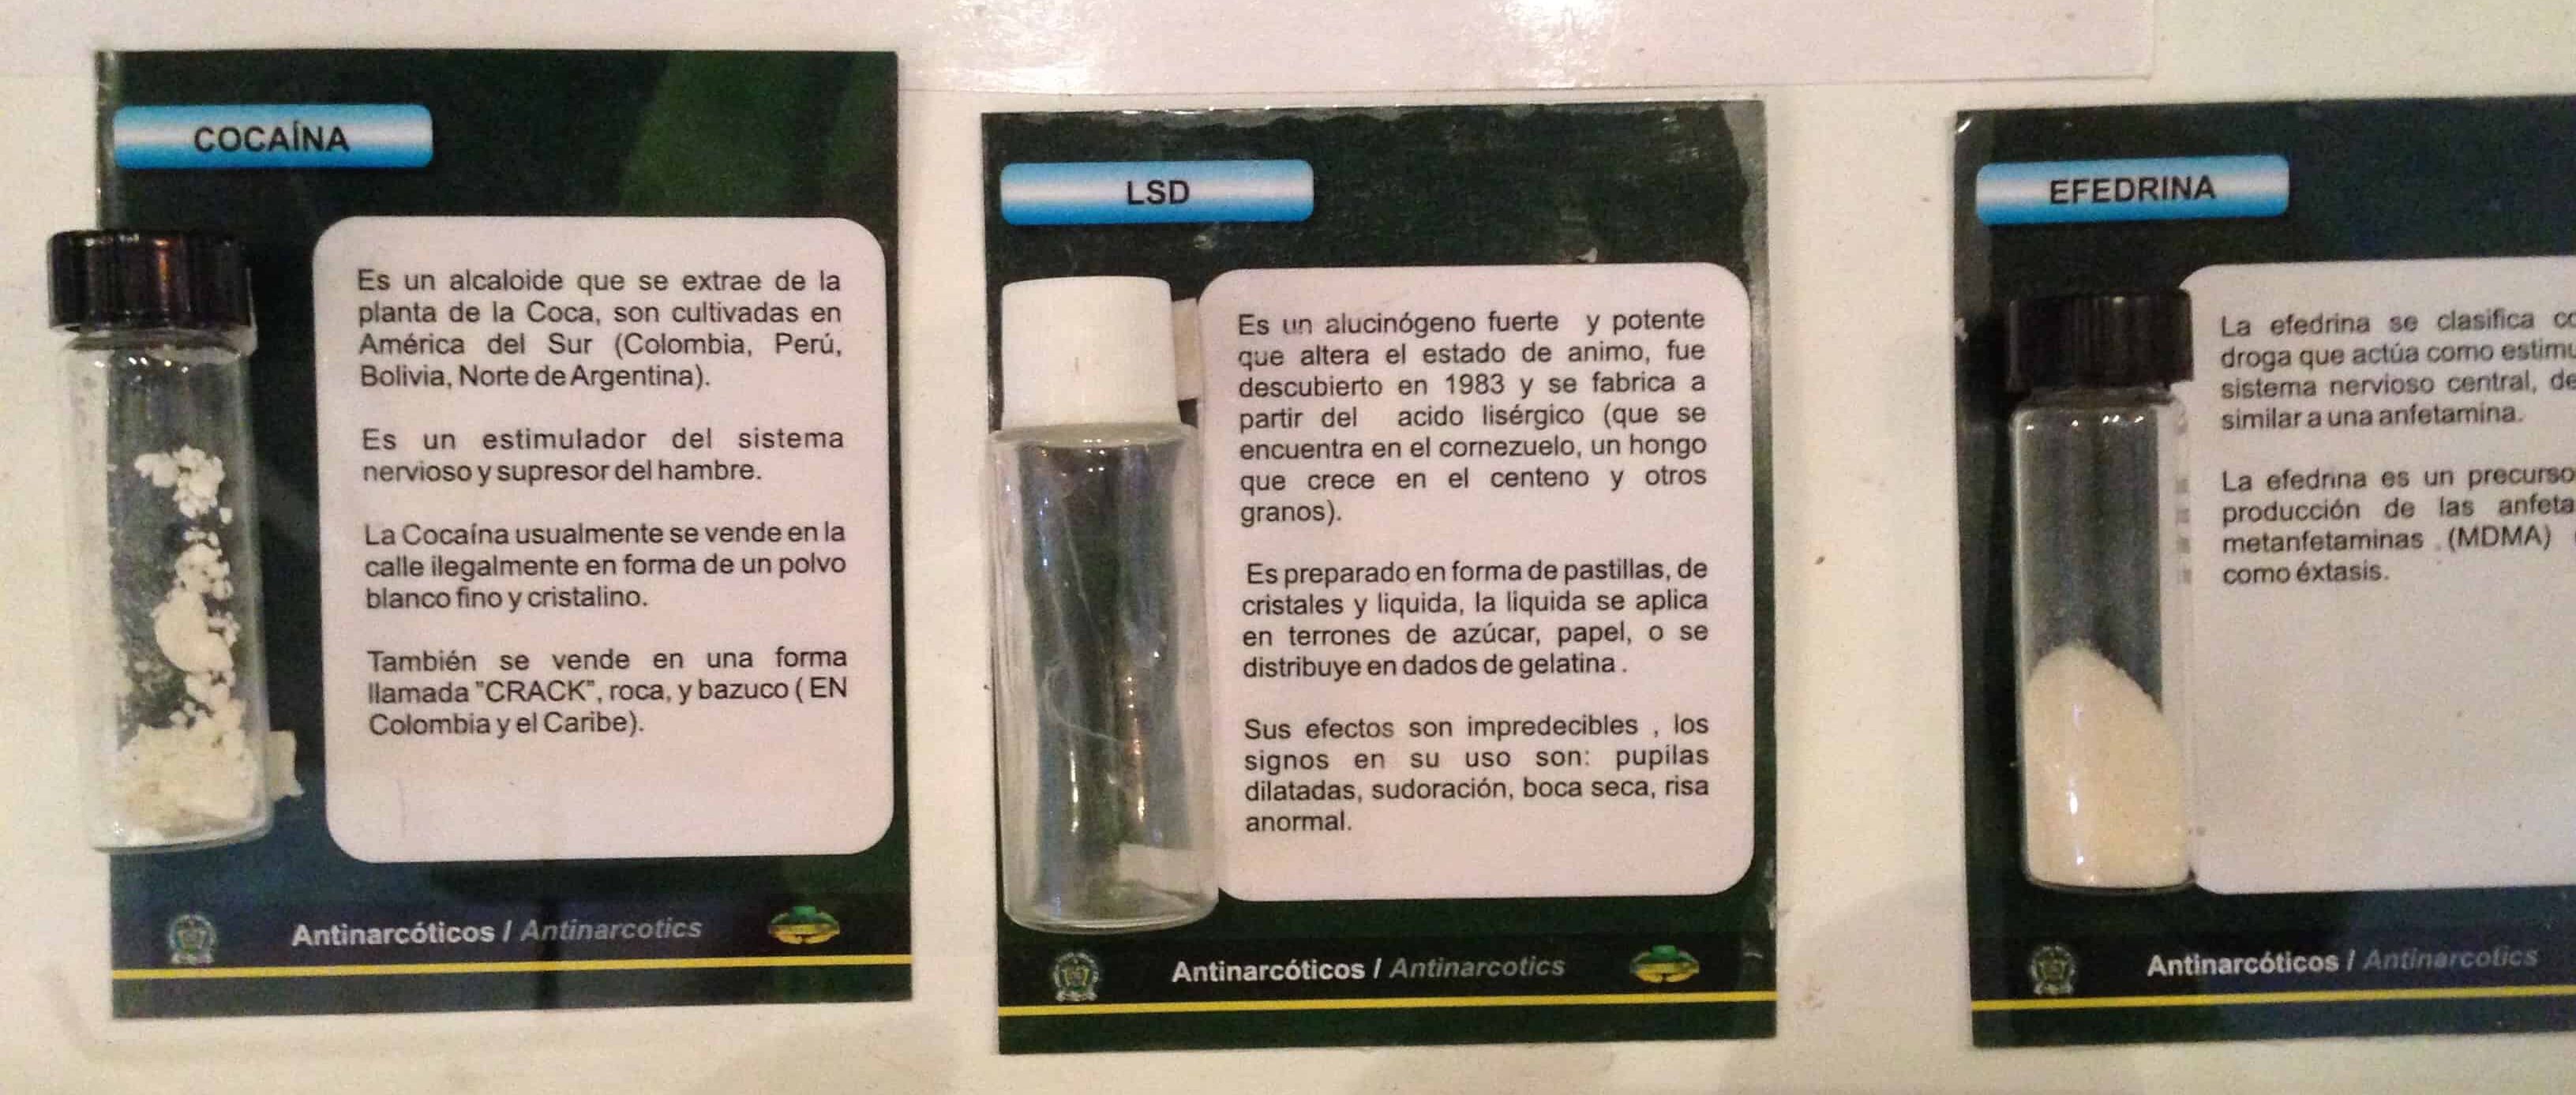 Illegal drugs at the National Police History Museum in La Candelaria, Bogotá, Colombia